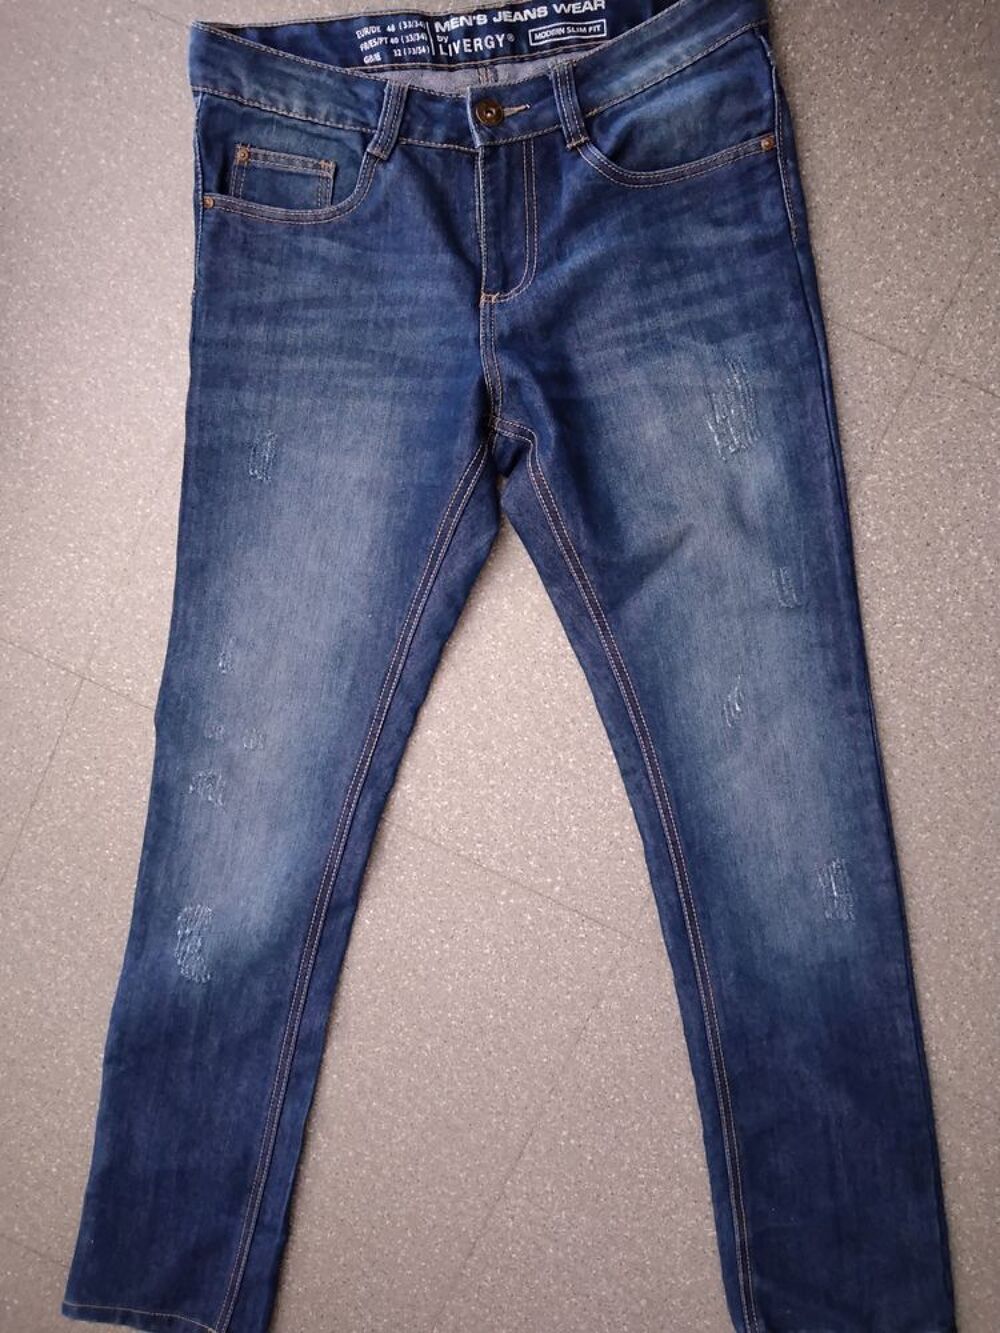 Jean neuf taille 42 Vtements